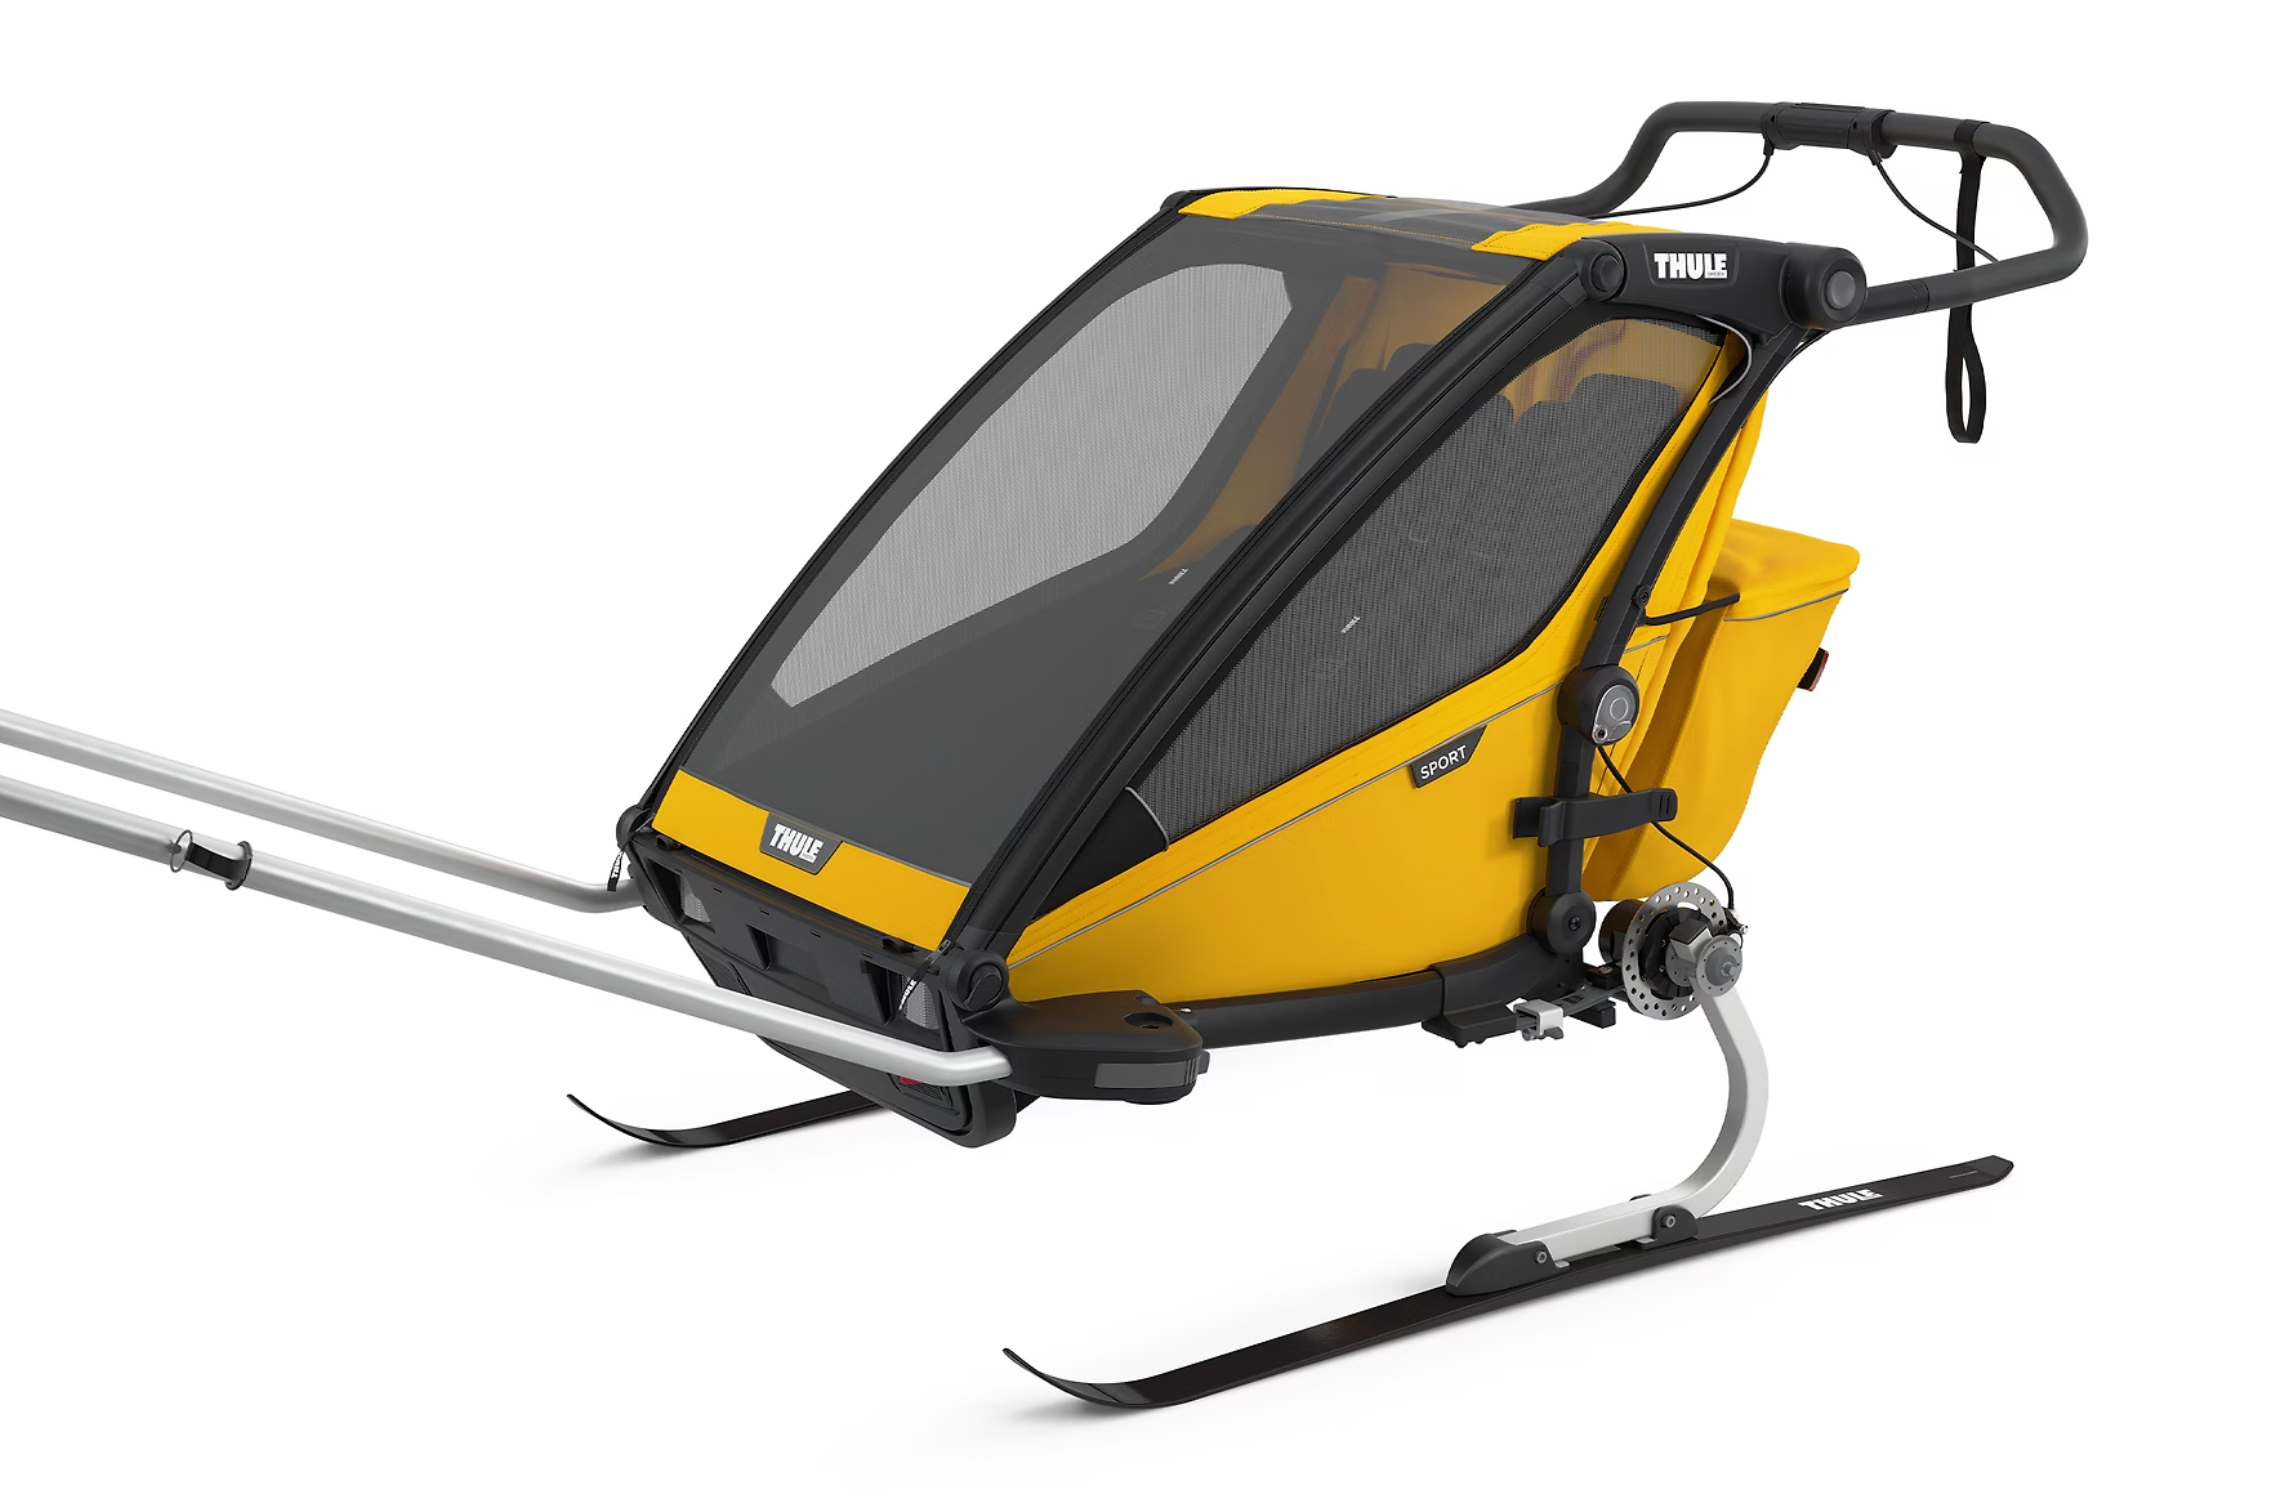 Thule Chariot Sport - Single Spectra Yellow